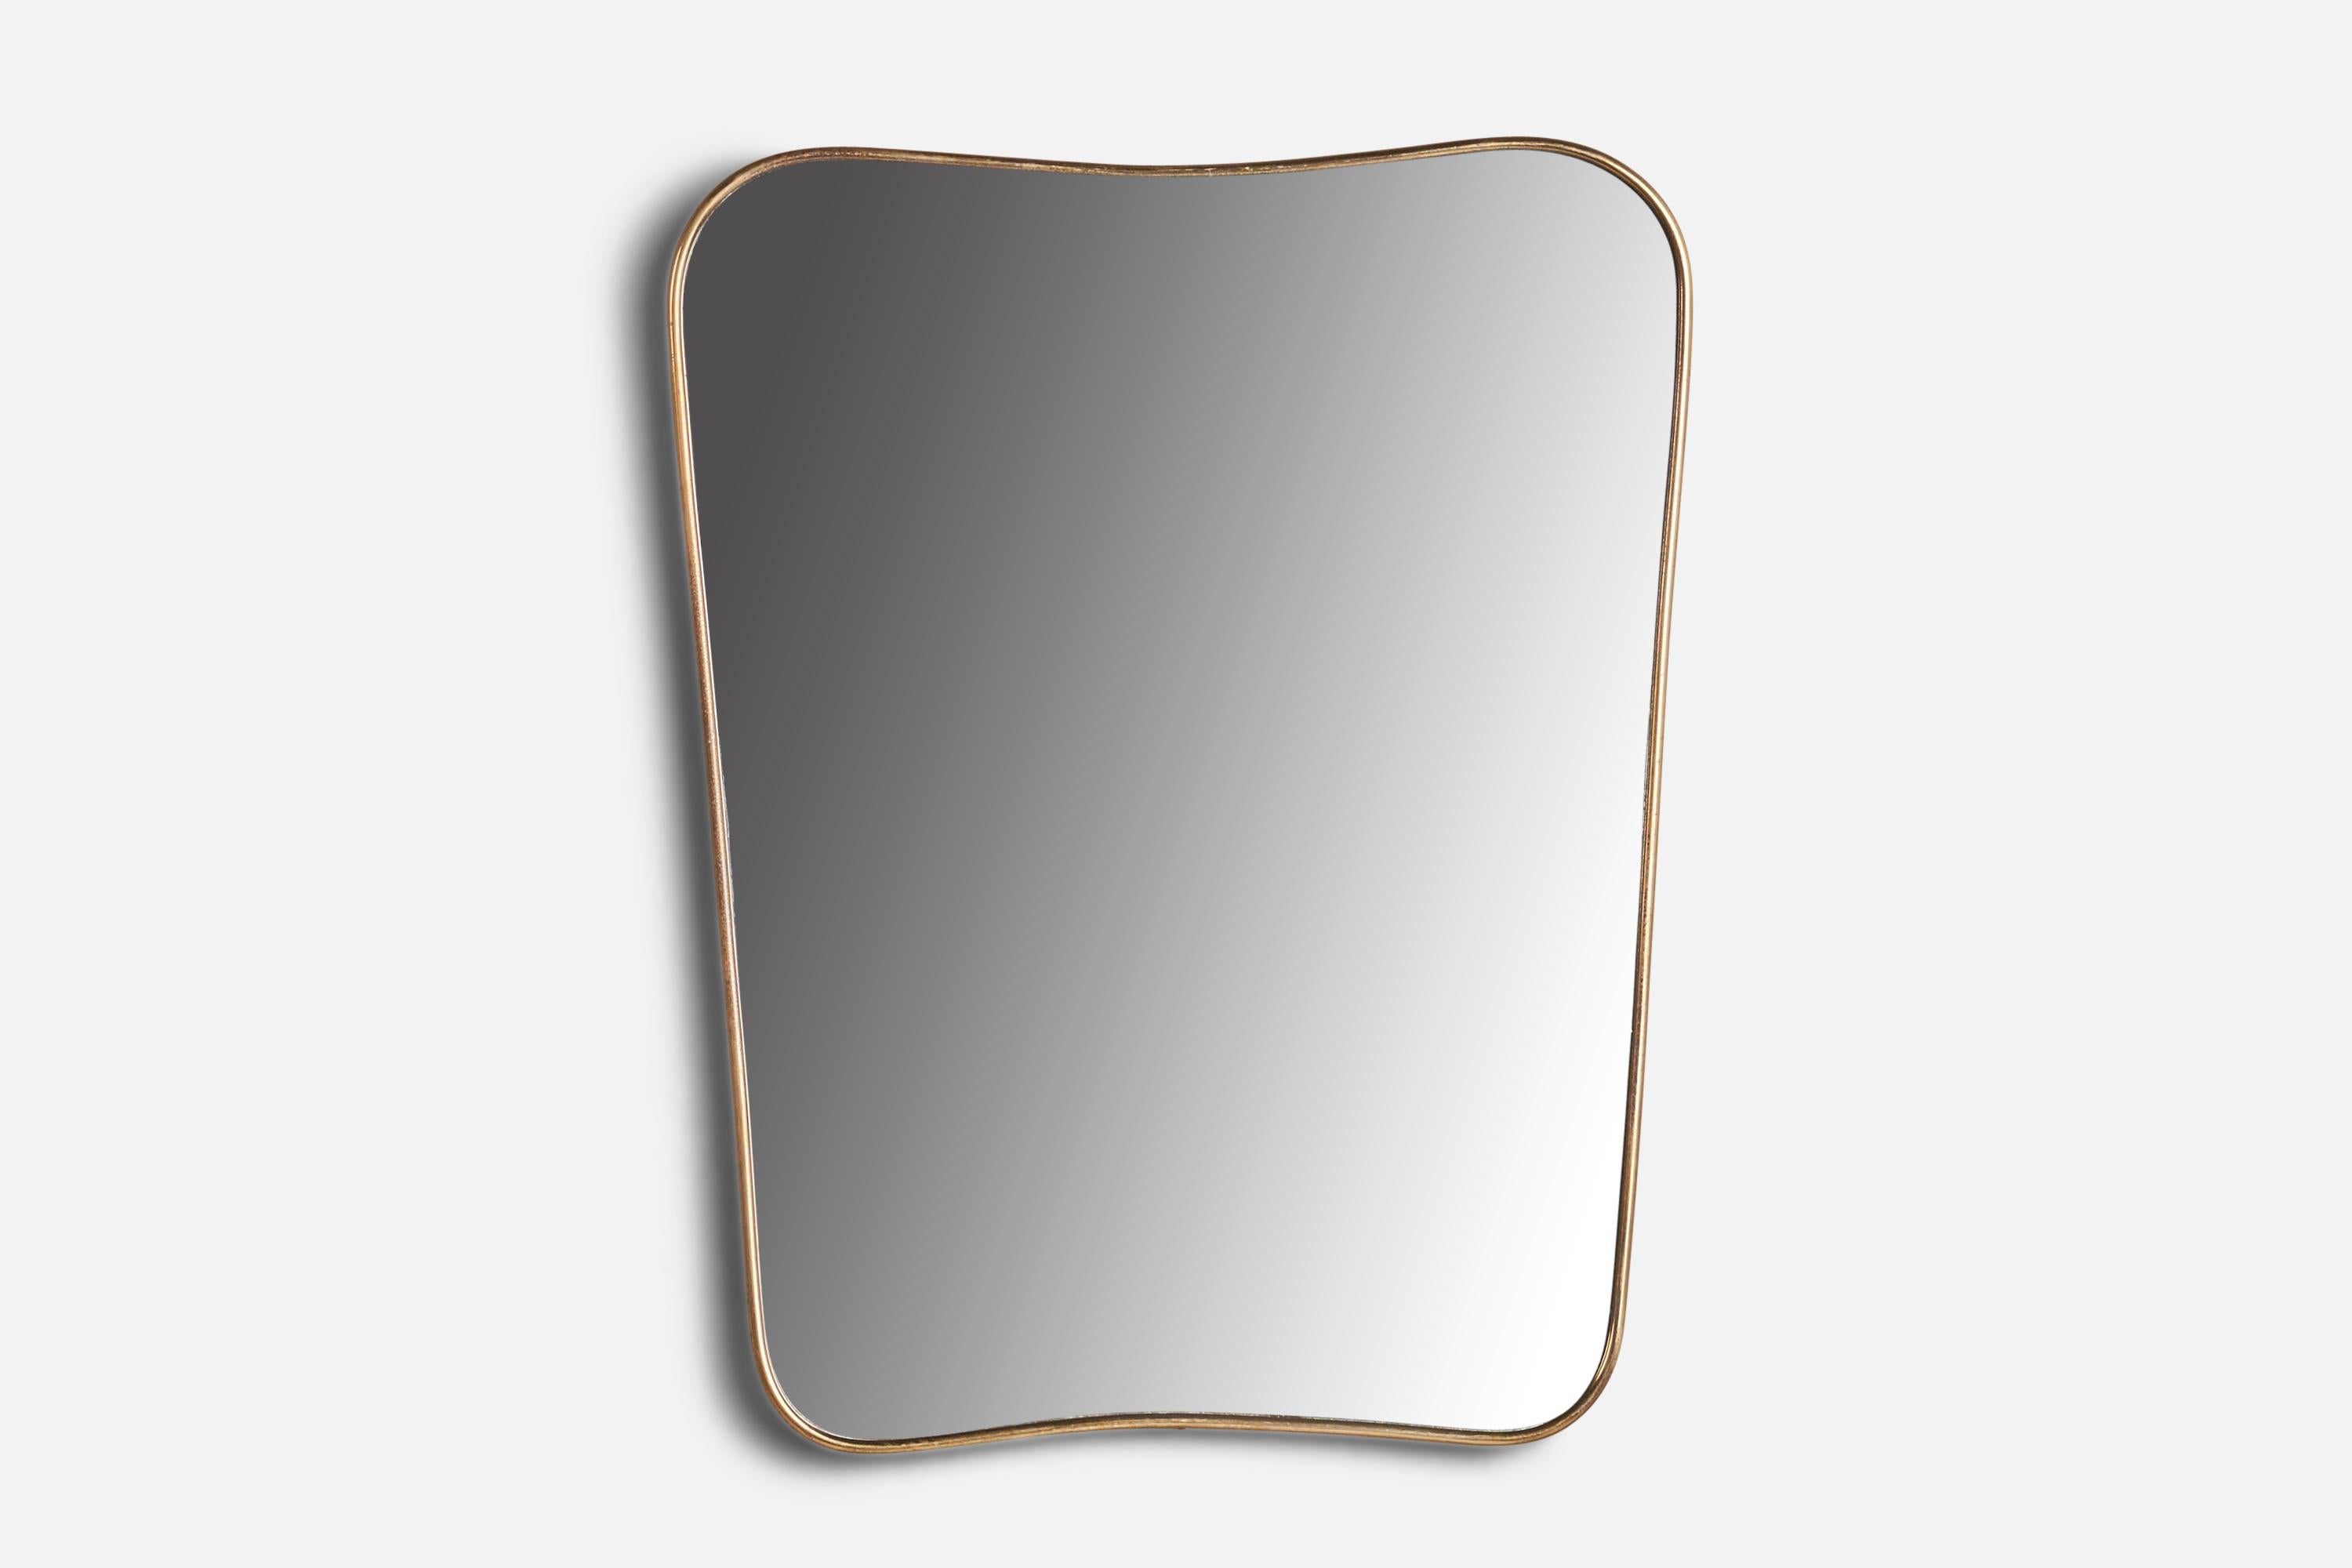 A brass wall mirror designed and produced in Italy, c. 1940s.